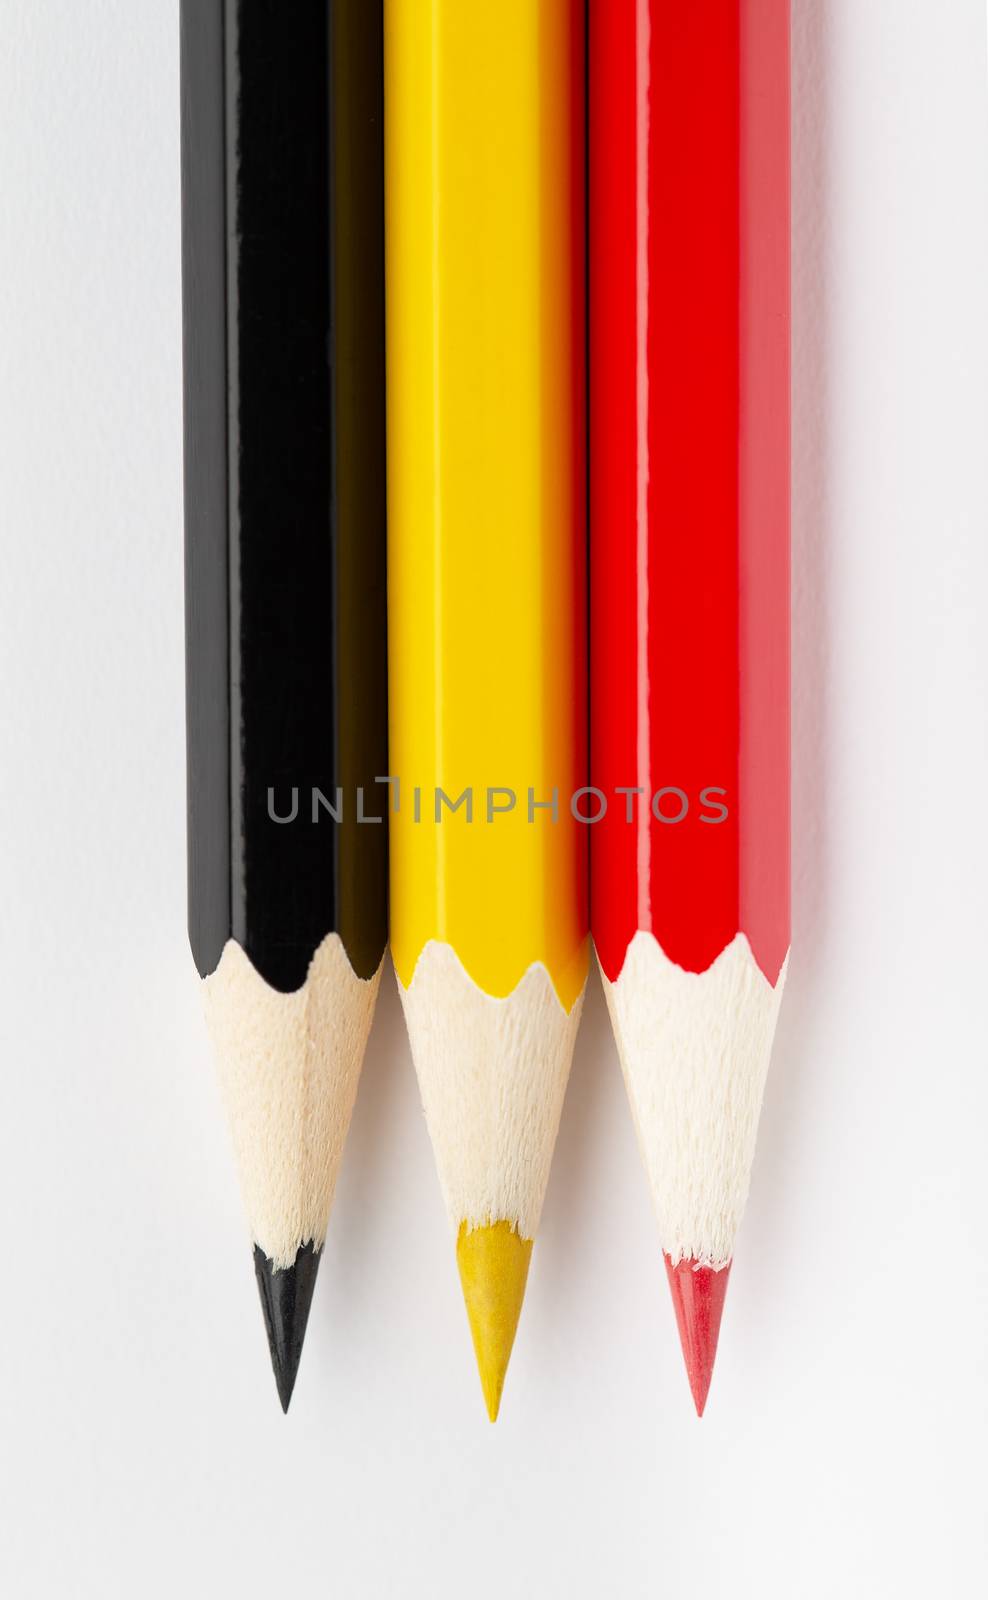 State flags made of colorful wooden pencils Belgium by 25ehaag6